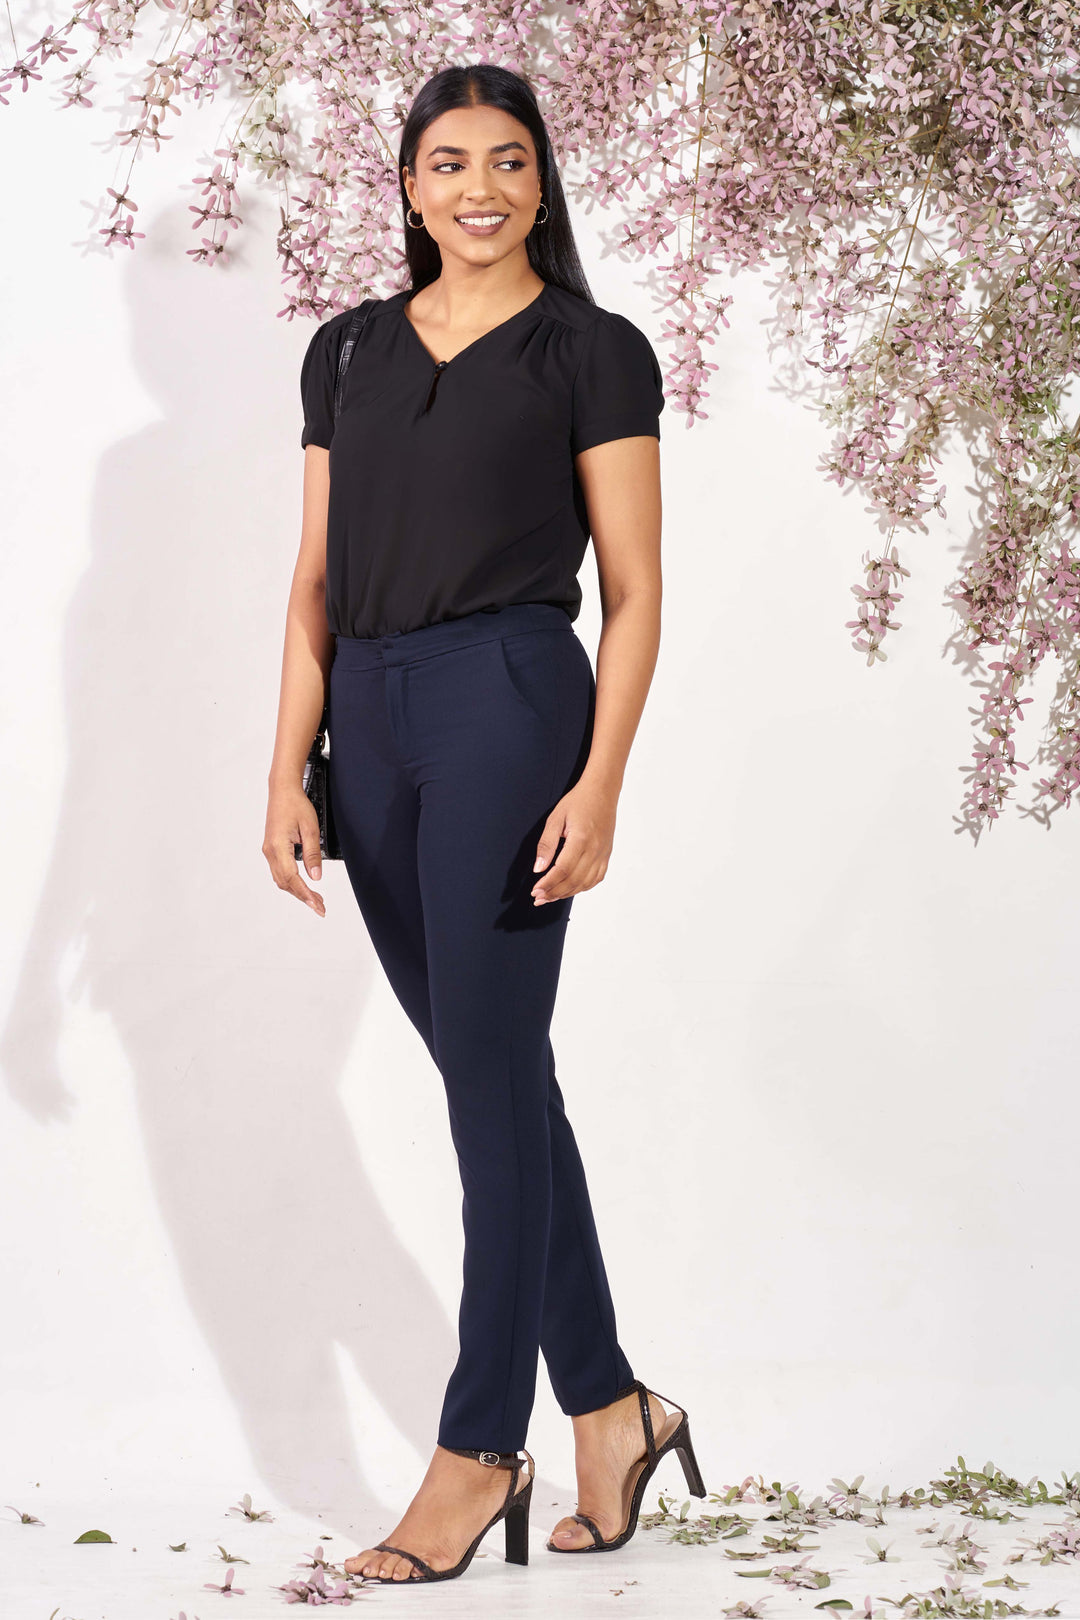 Black Puff Sleeve Top - Relax Fit, Top, New Arrivals, Office Tops, Puff Sleeve, SH21, Short Sleeves, Smart Casual, Smart Casual Top, V Neck, Work Top, workwear - MONDY, Sri Lankan women's clo